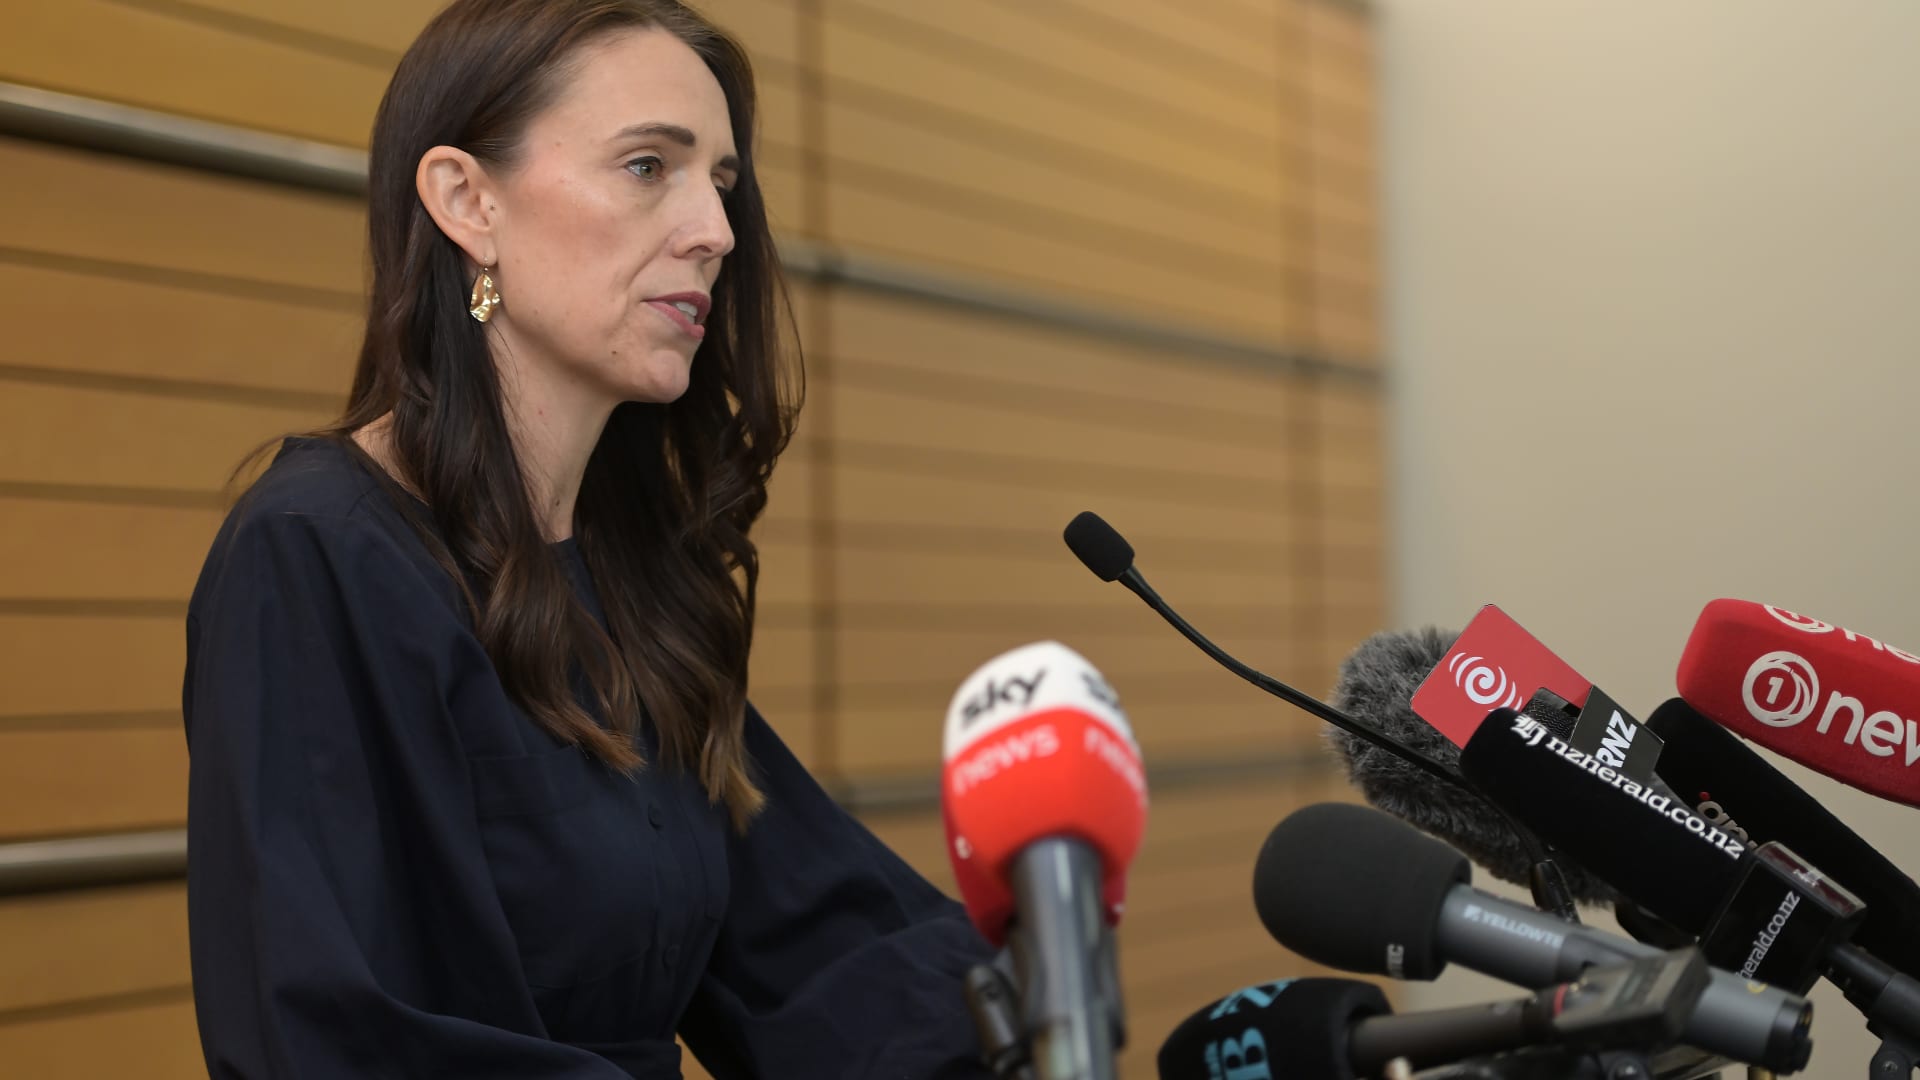 New Zealand PM Jacinda Ardern says she will not seek reelection